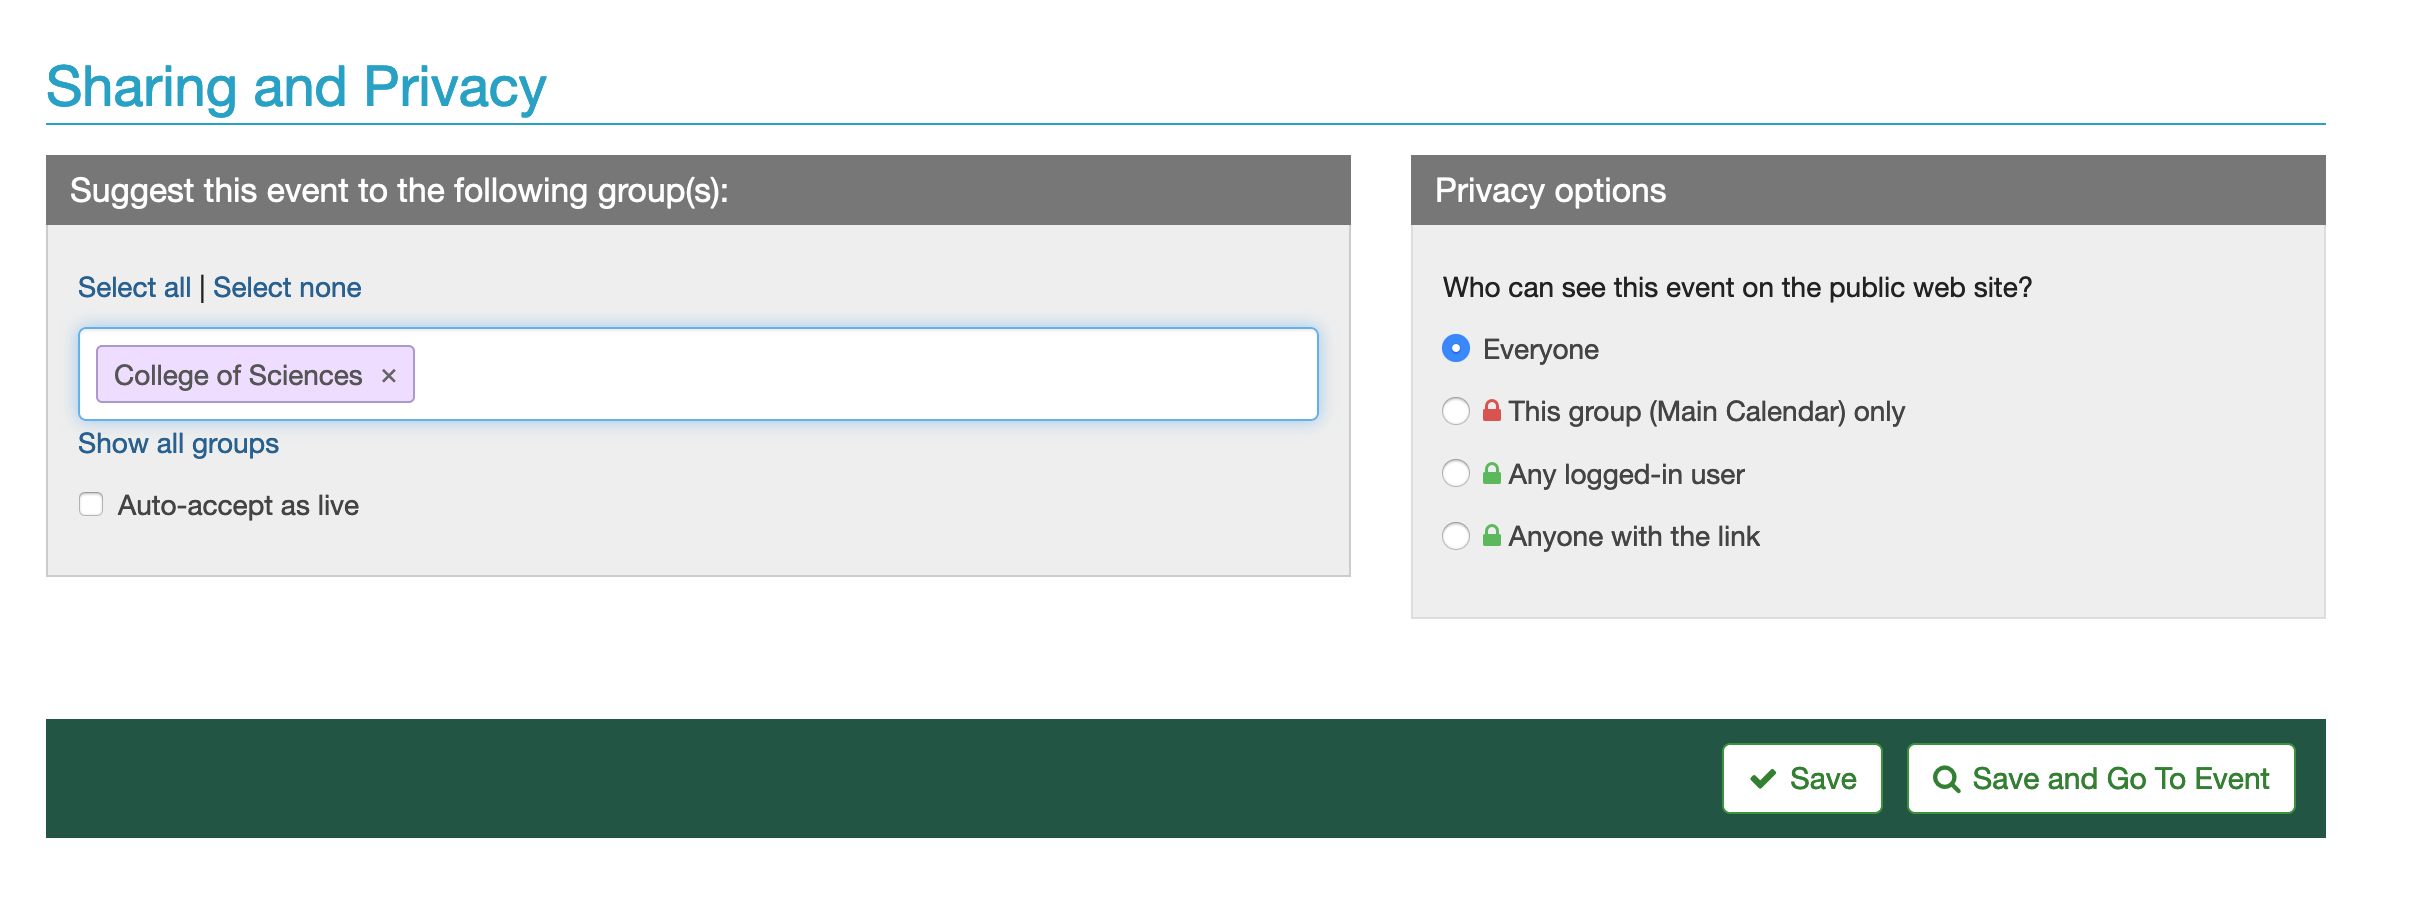 screen shot of sharing and privacy section